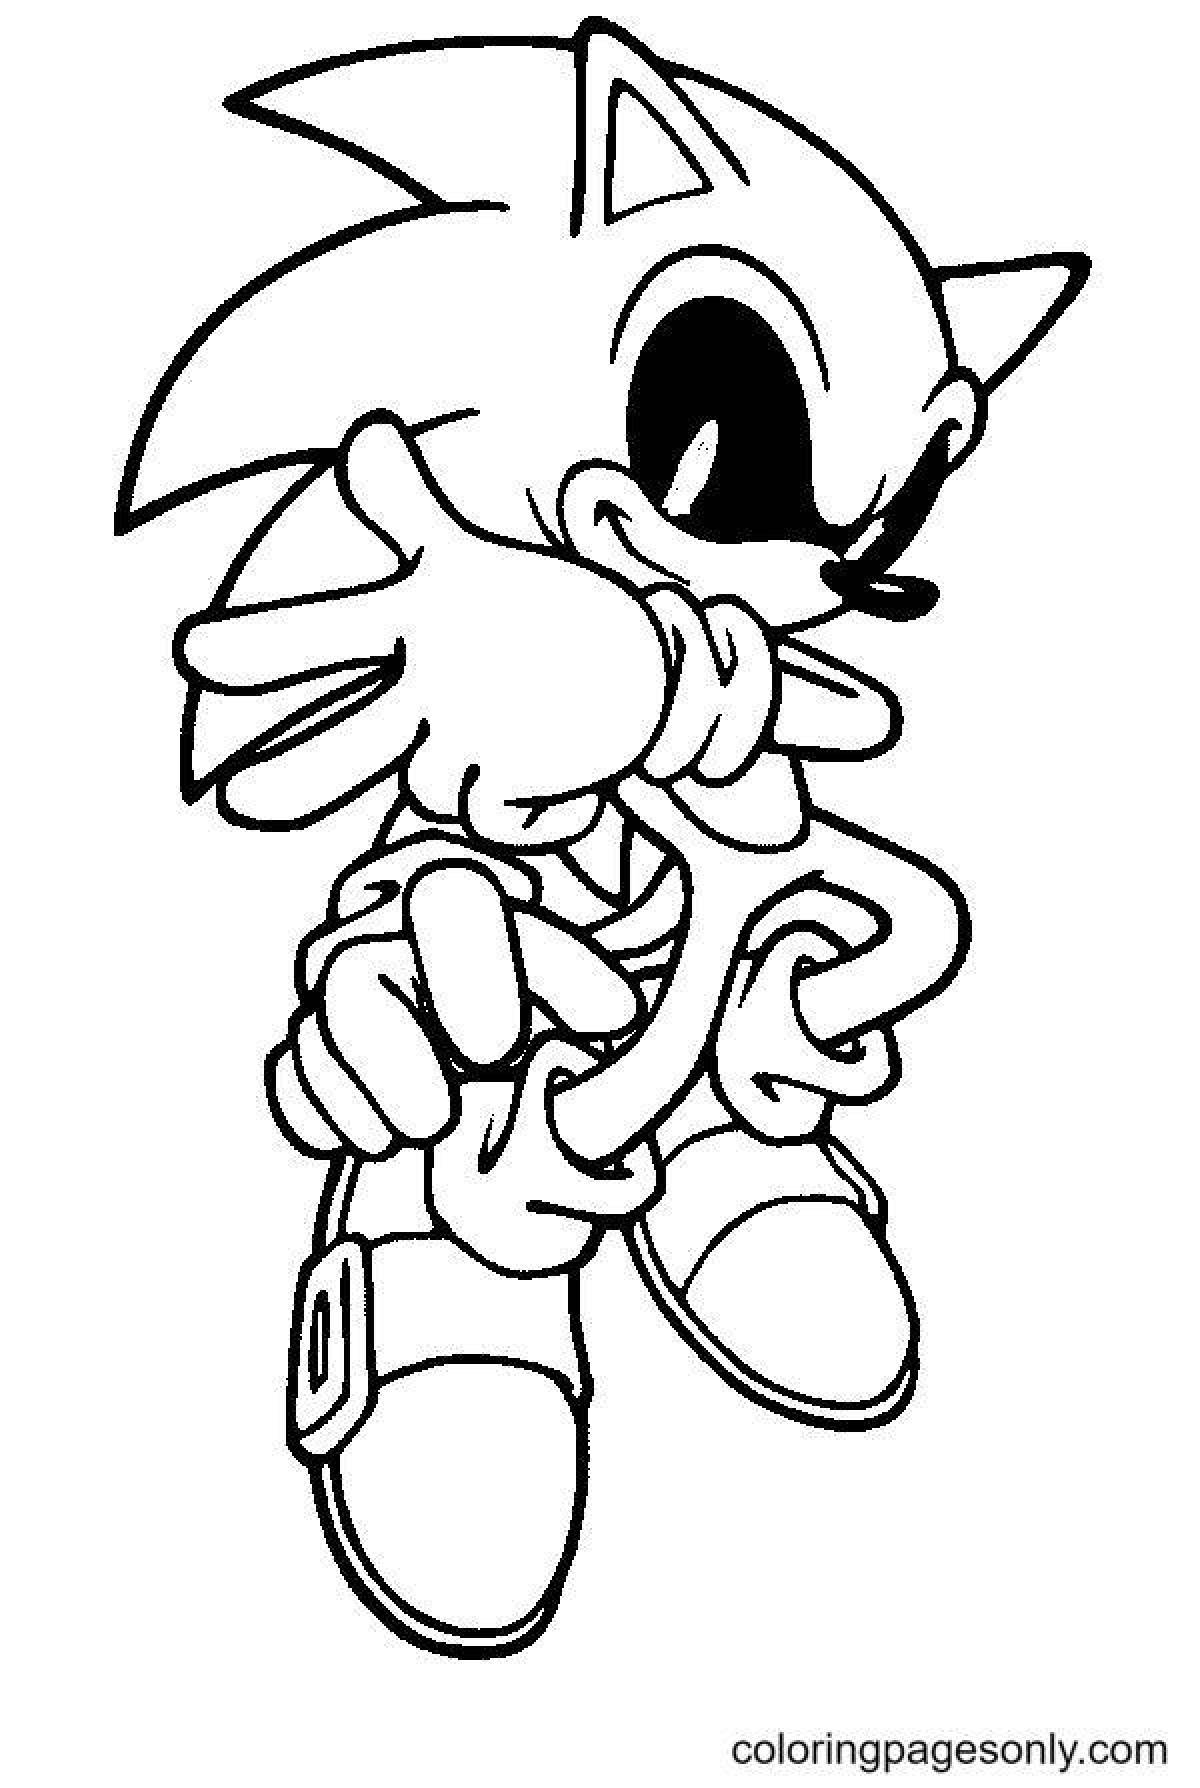 Sonic exe awesome coloring book